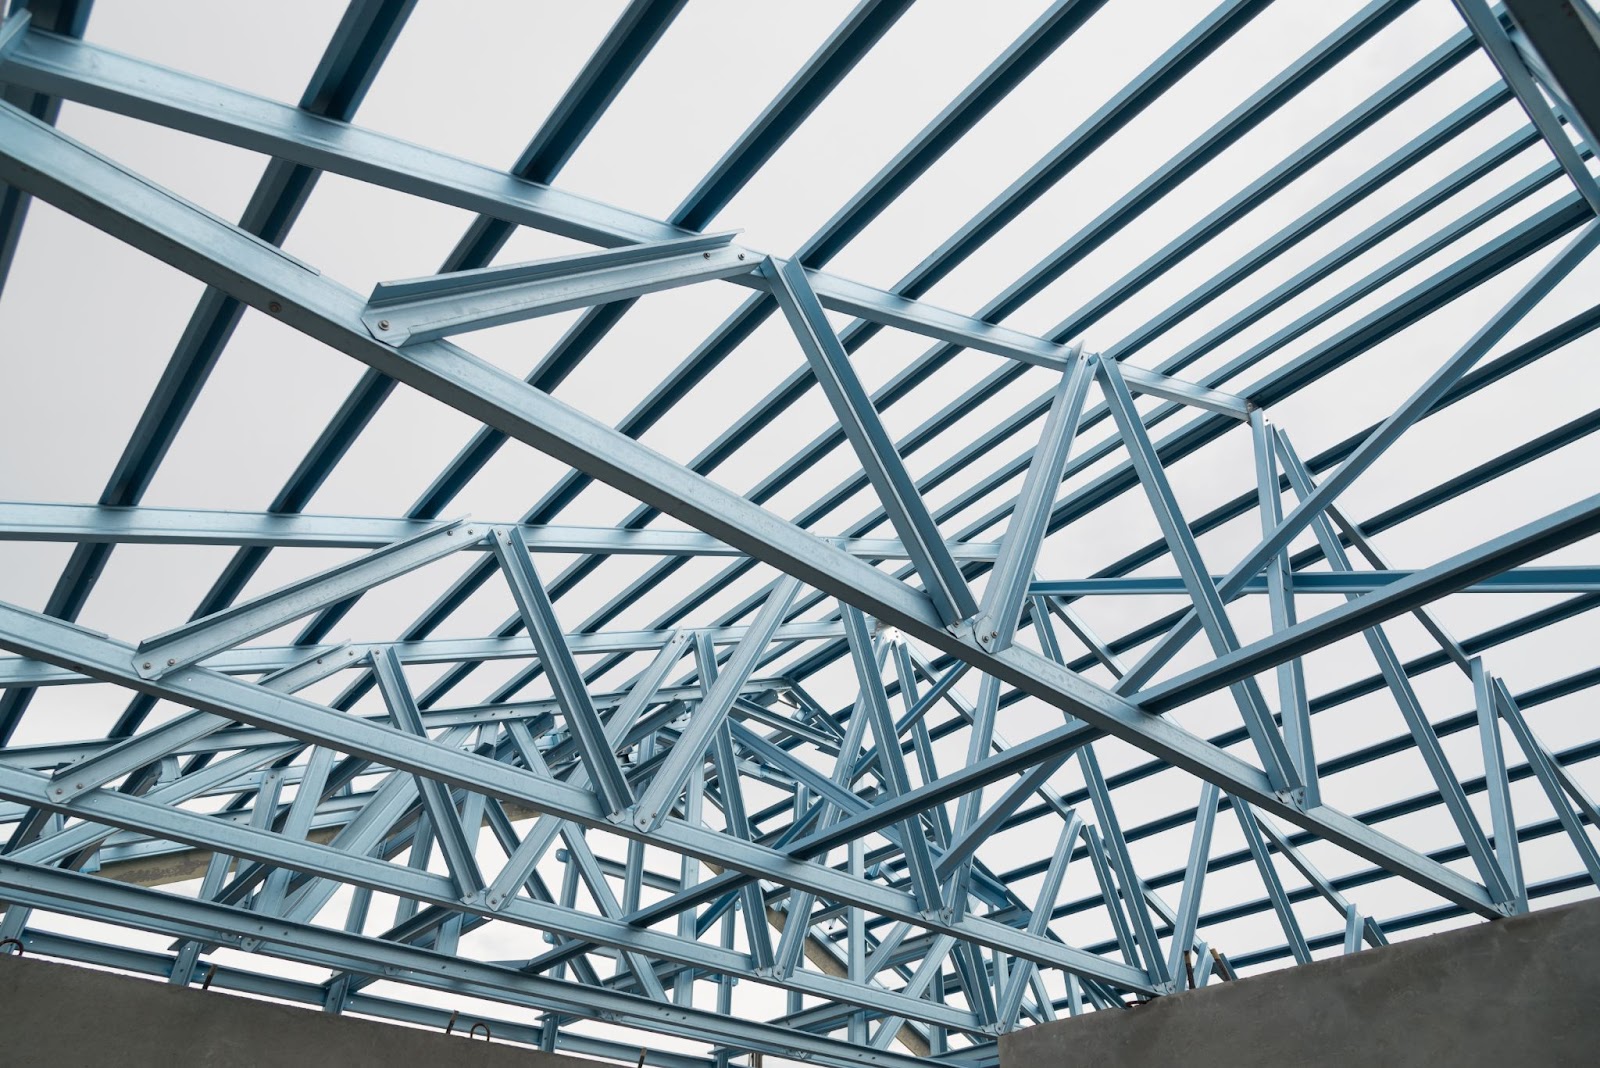 Steel trusses are popular in commercial construction due to their durability, strength, and numerous design advantages